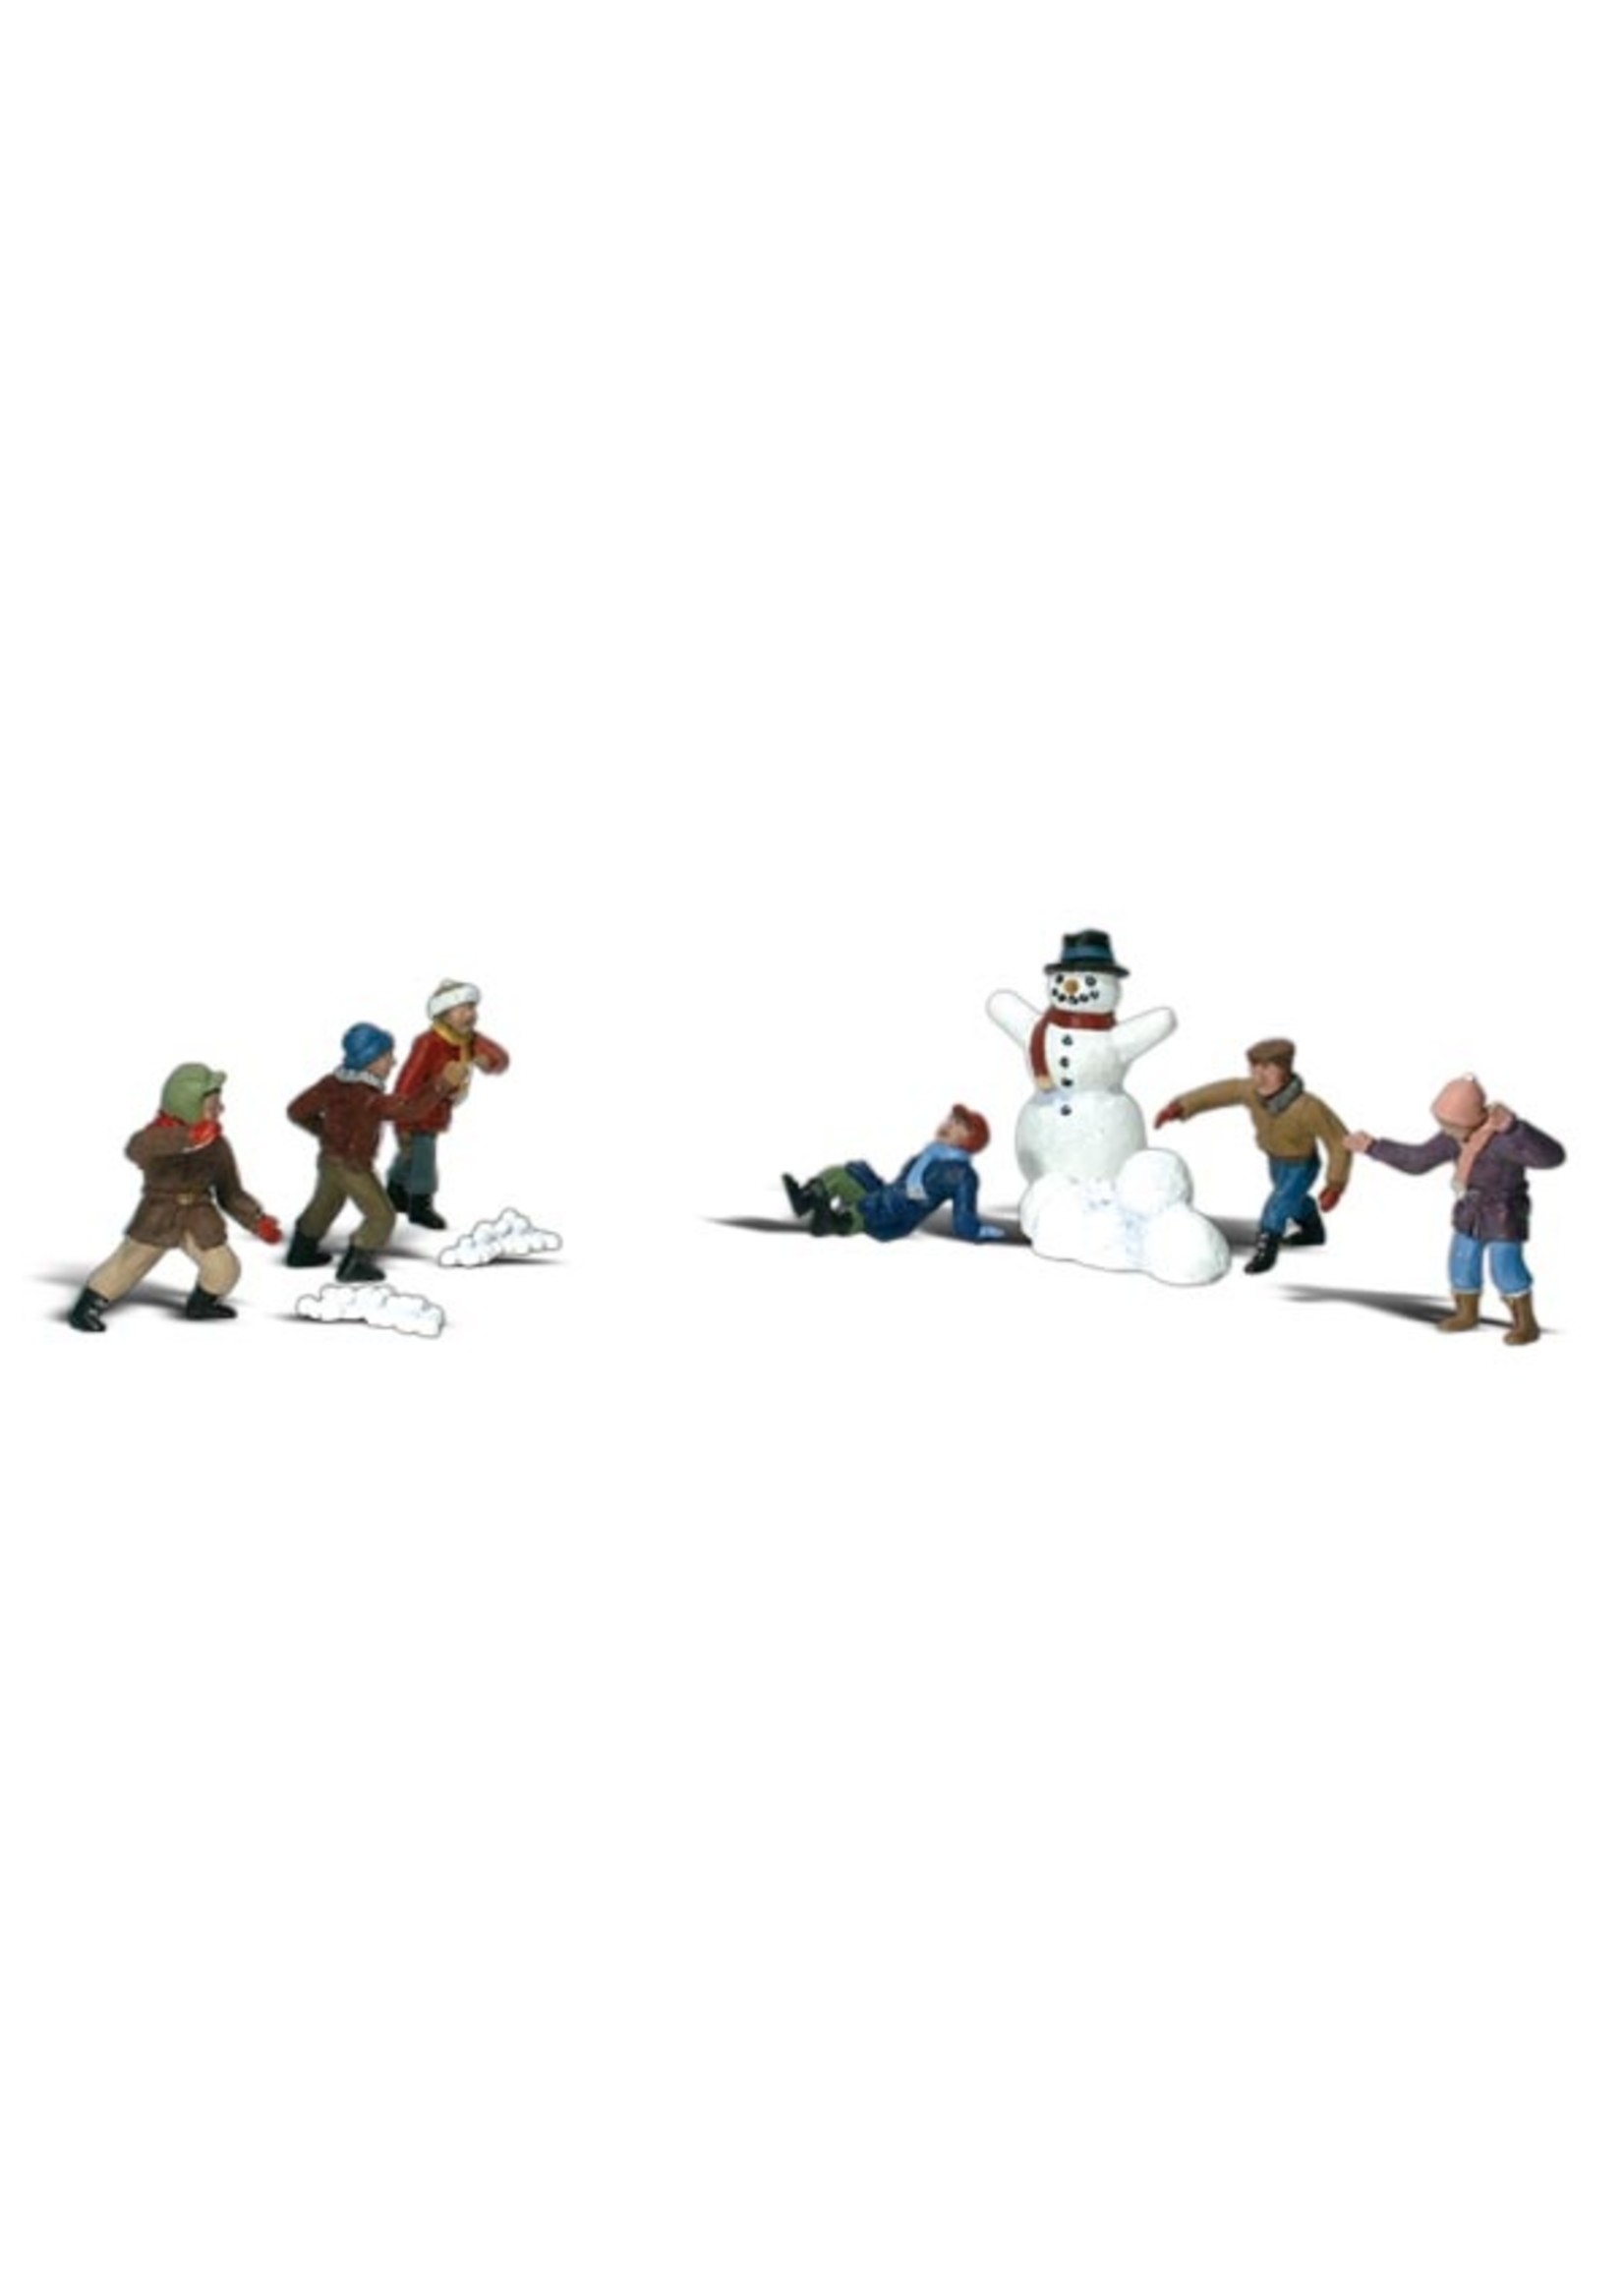 Woodland Scenics A2183 - N Scale Snowball Fight